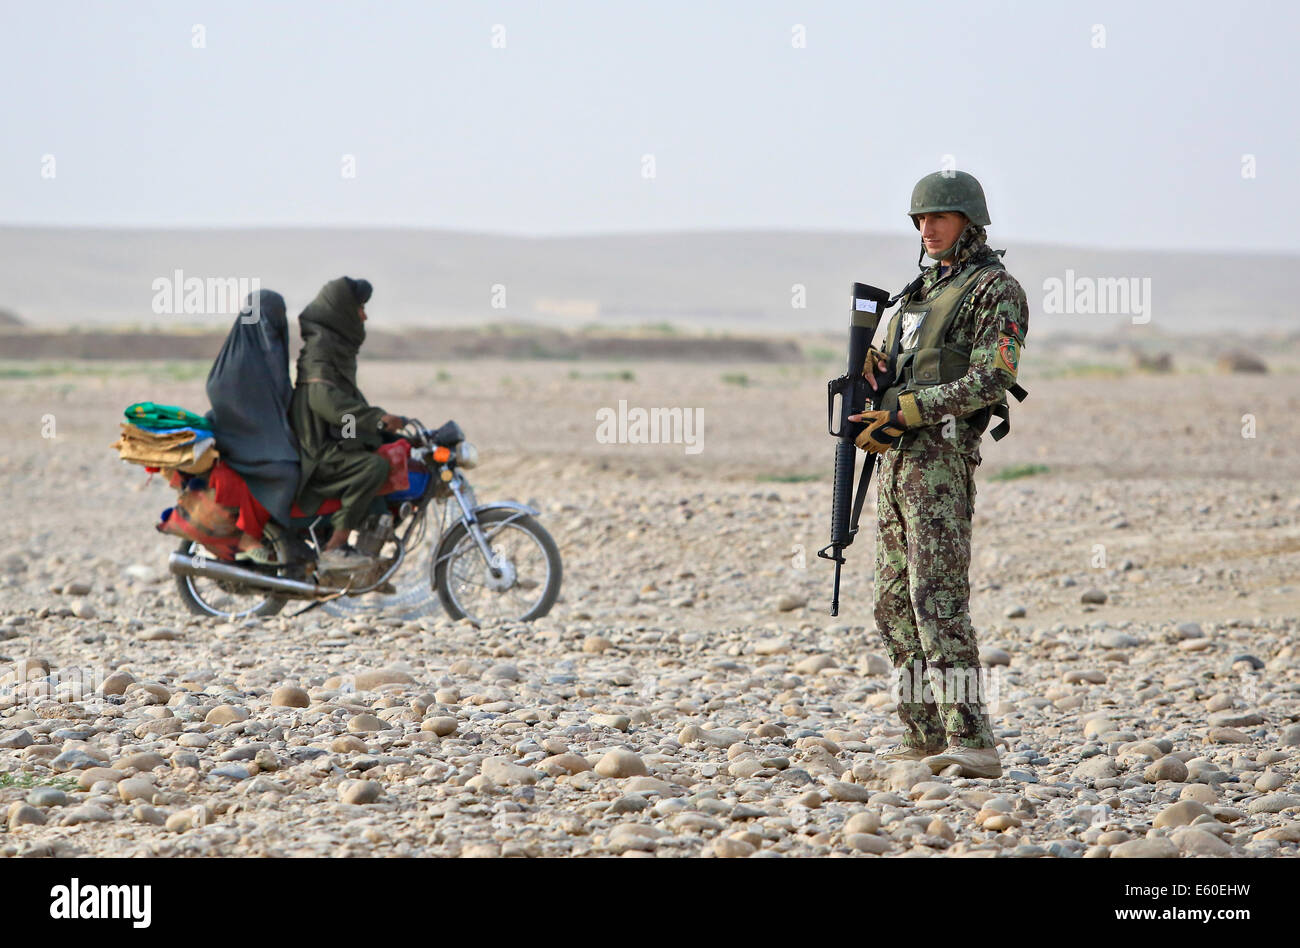 Afghan civilians ride past an Afghan National Army soldier at a vehicle checkpoint July 14, 2014 in the Shekasteh Tappeh village, Helmand province, Afghanistan, July 14, 2014. Stock Photo